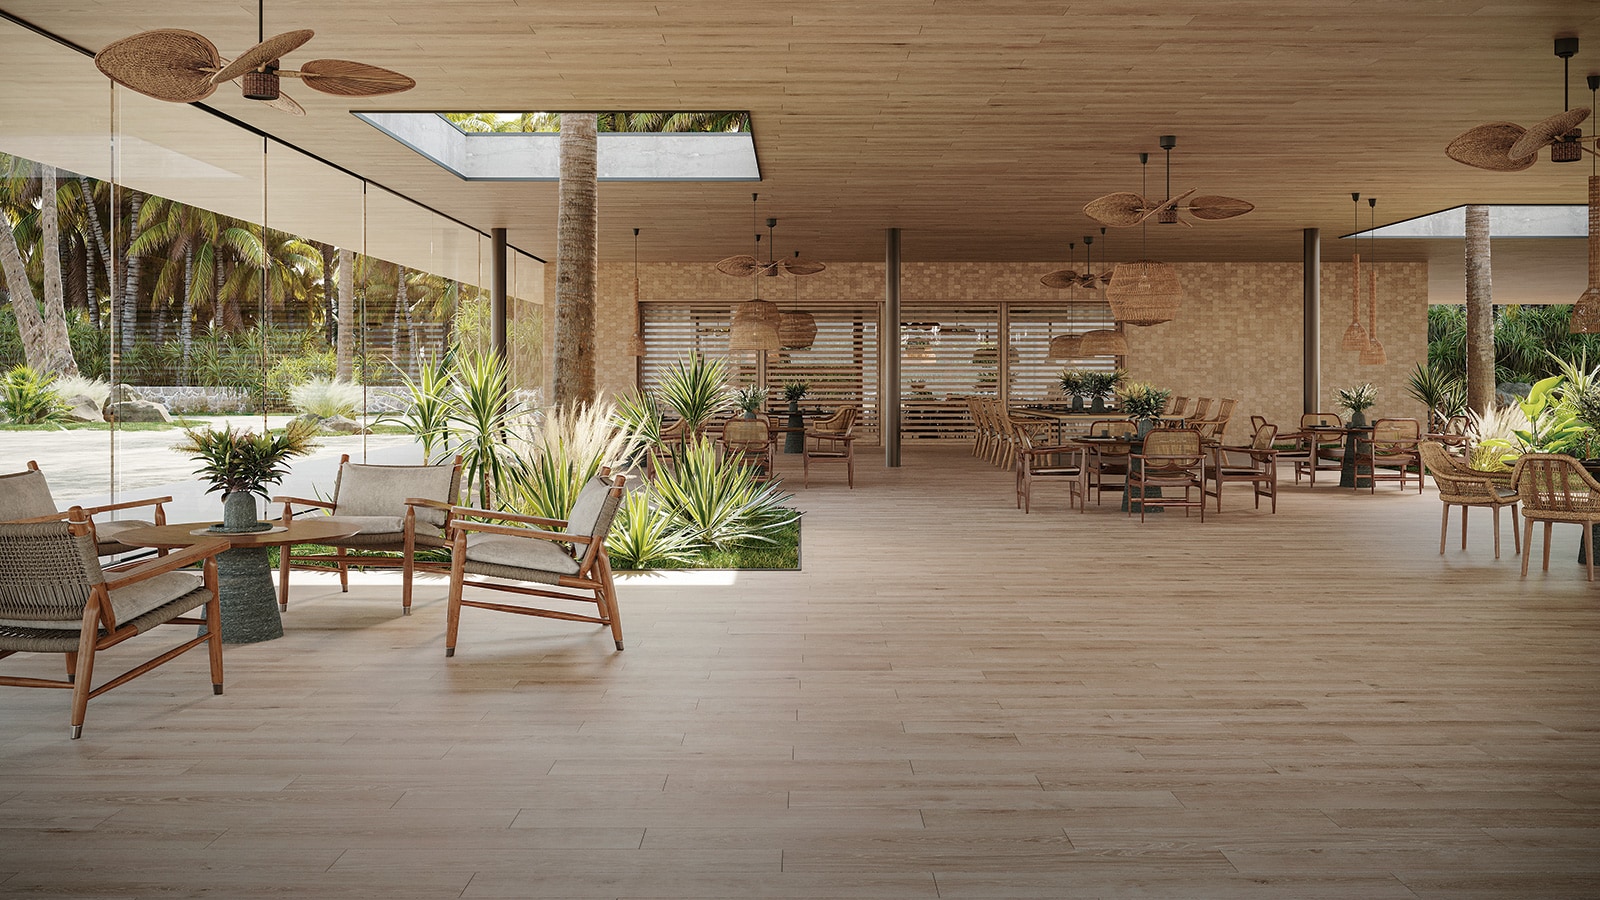 Ceramic wood, the most functional option for terrace flooring